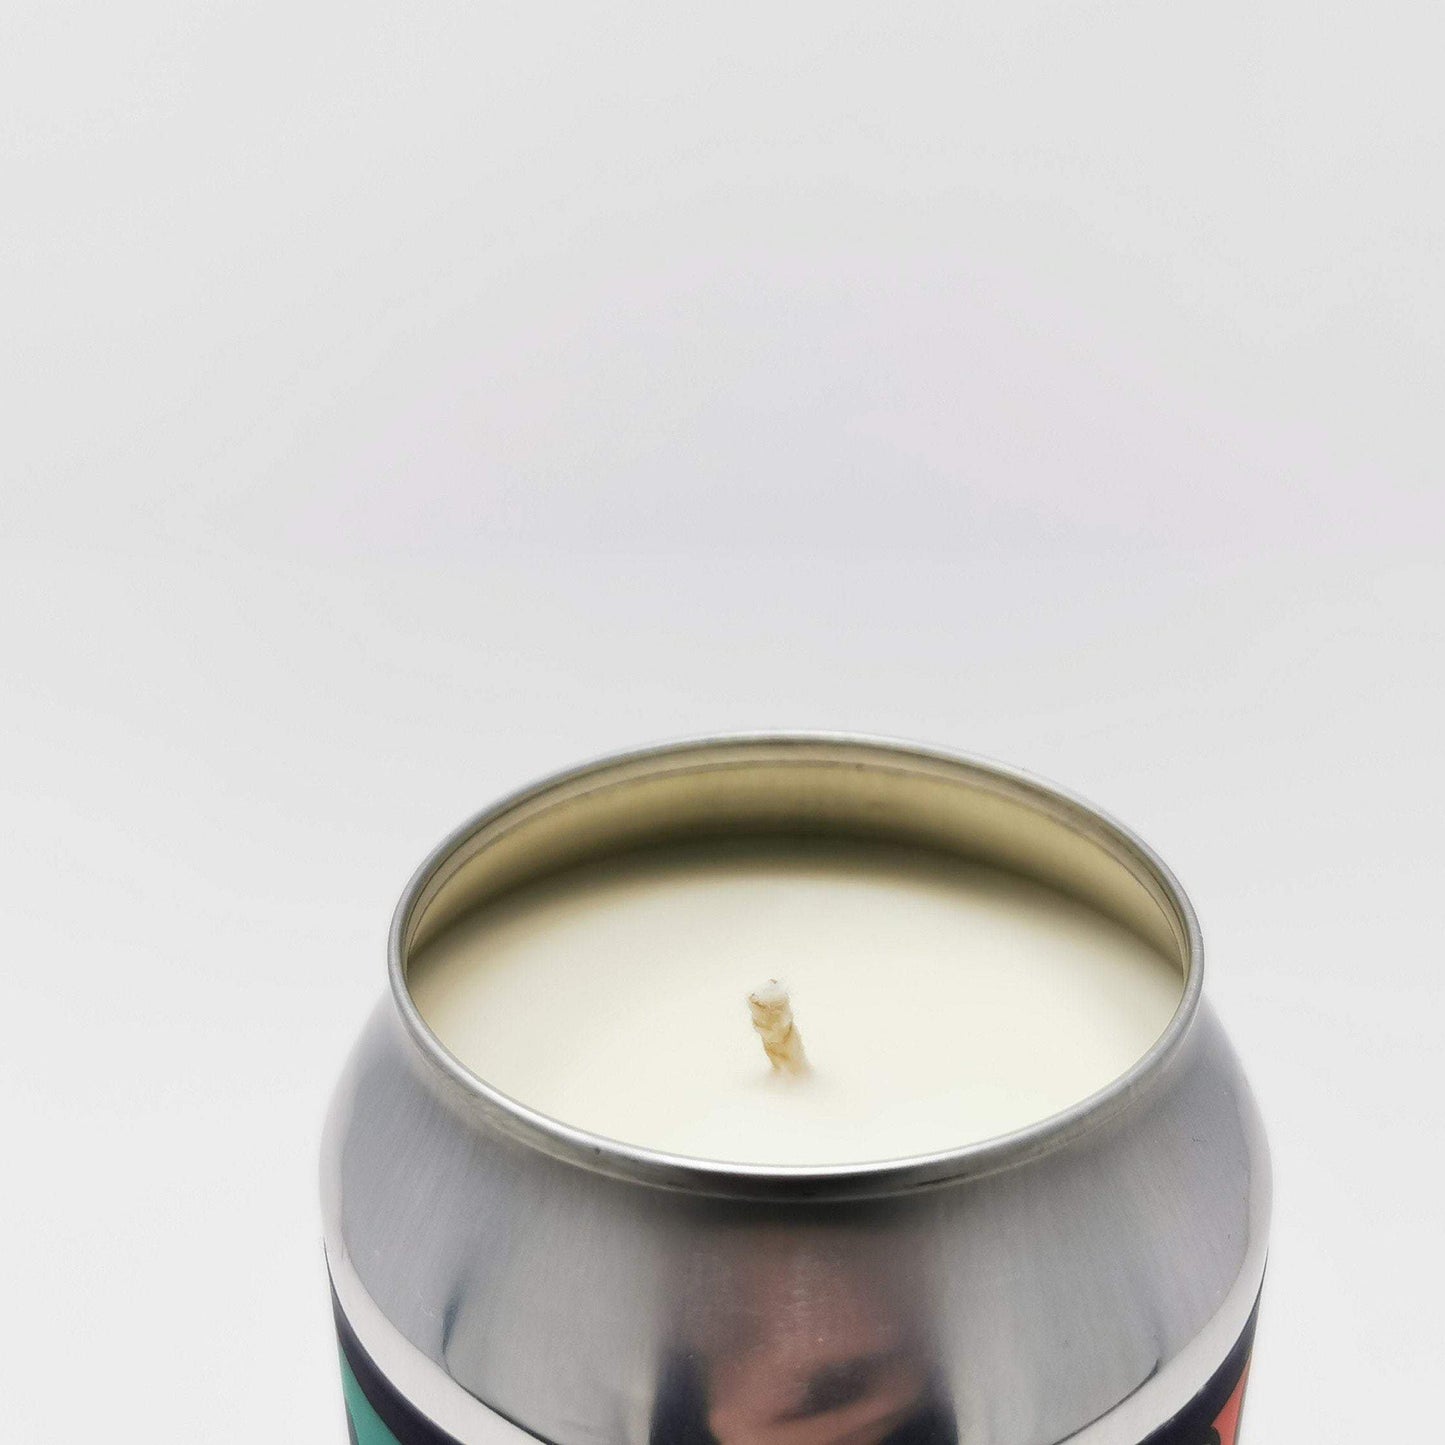 Amundsen & Northern Monk Virtual Reality Craft Beer Can Candle Beer Can Candles Adhock Homeware